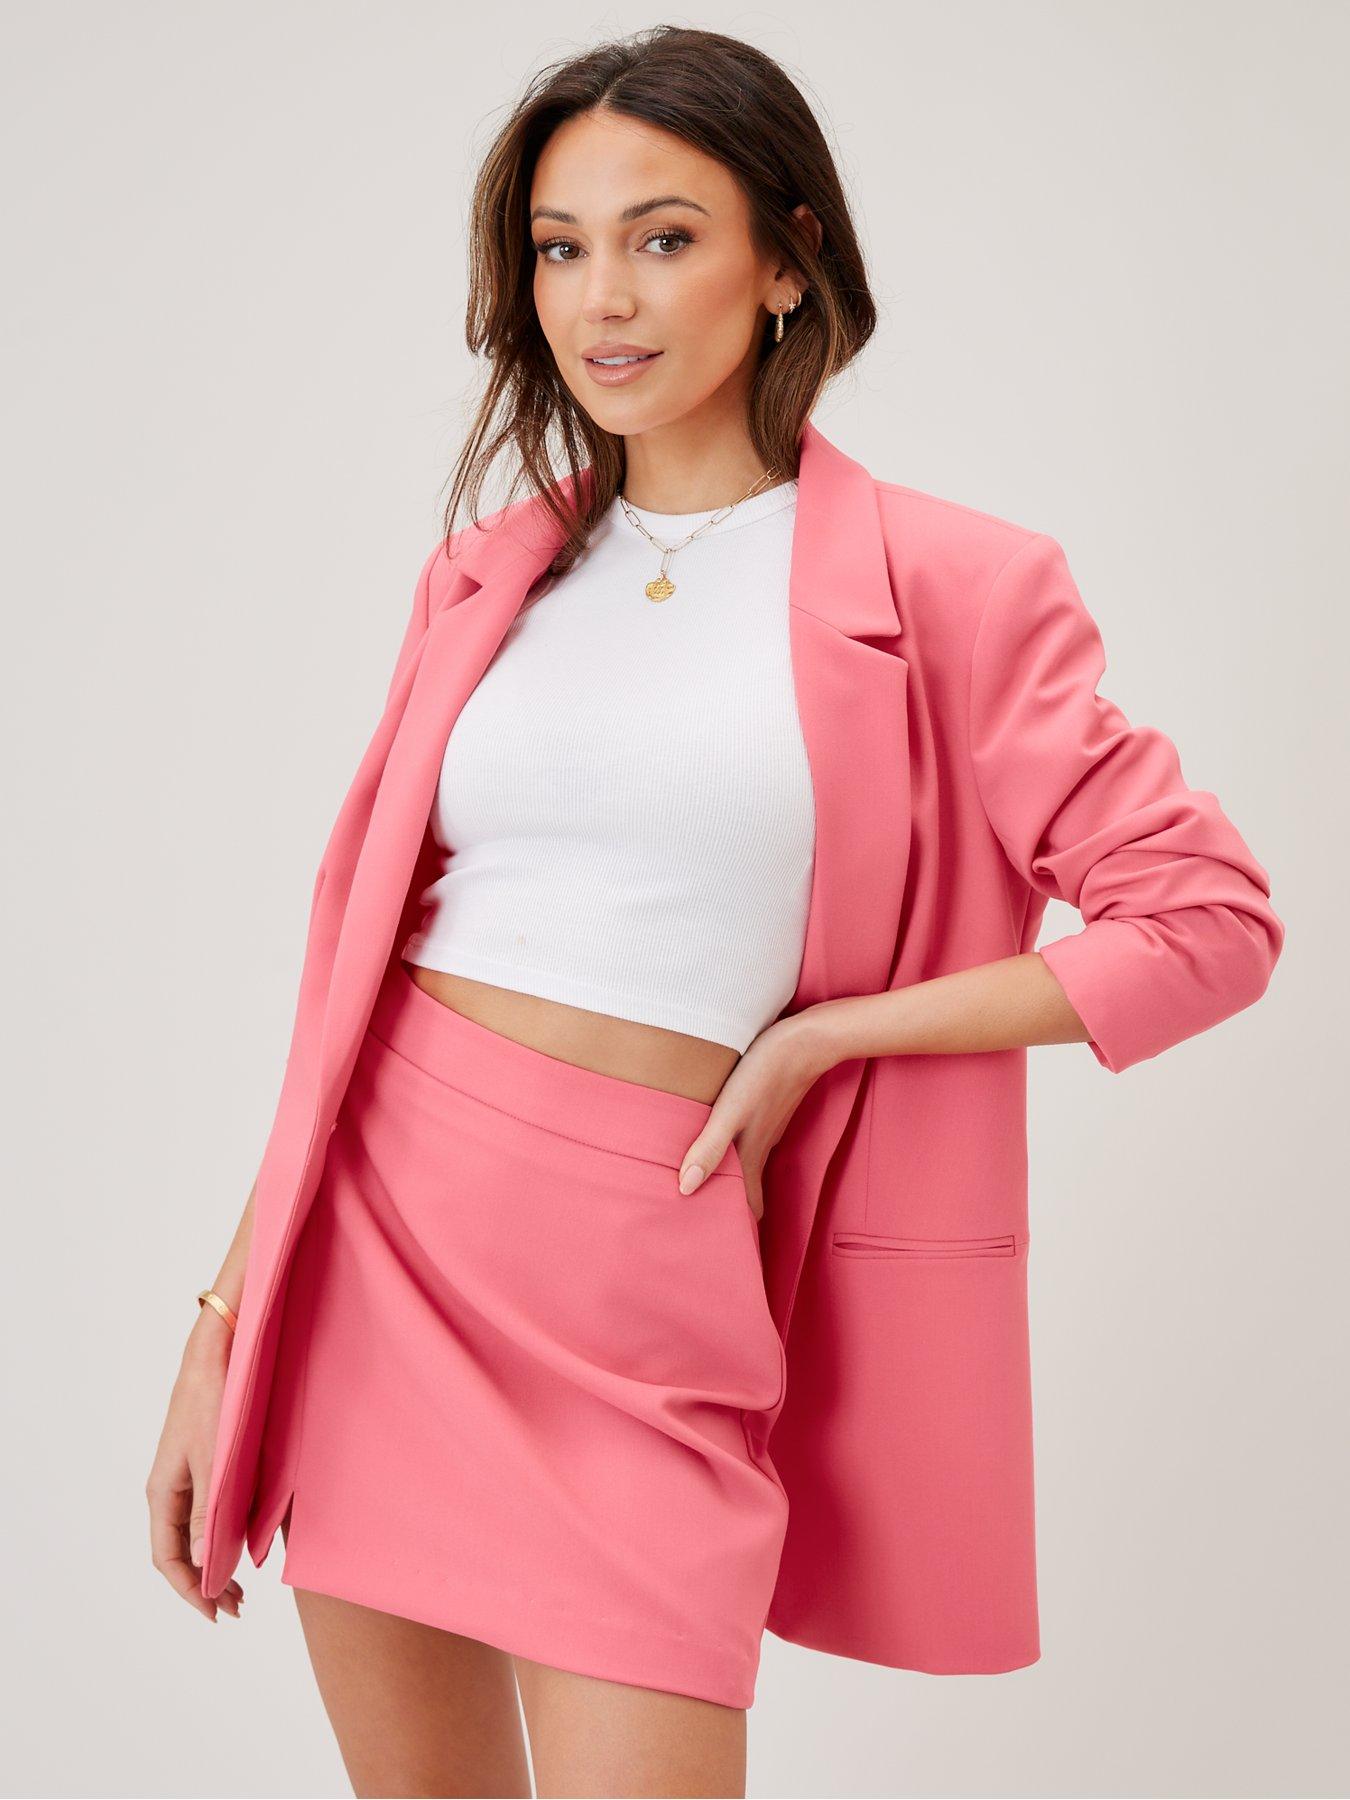 sport coats and suit jackets Womens Clothing Jackets Blazers Pinko Cotton Suit Jacket in Fuchsia Pink 